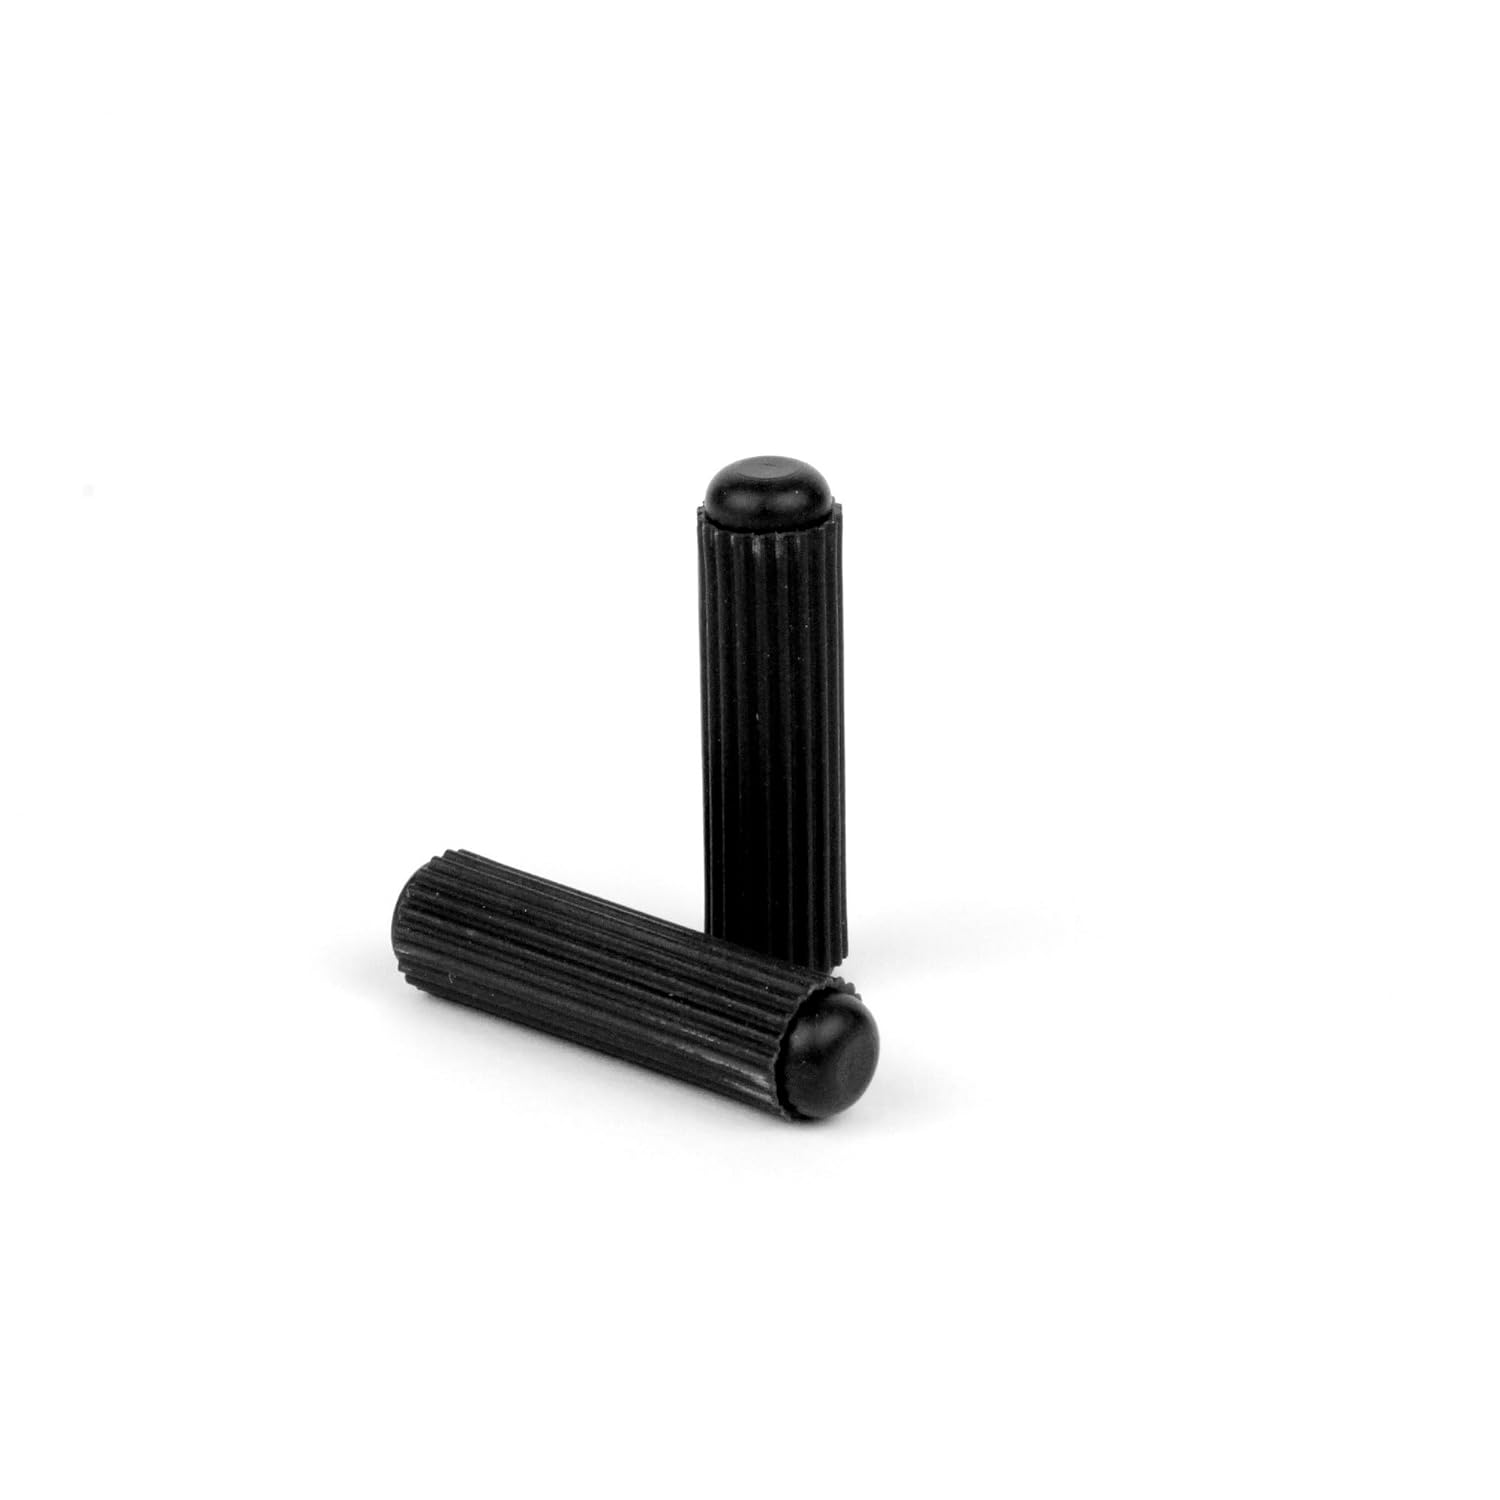 Plastic Dowel Pins, Fluted | Easier Insertion Straight Grooved Pins, Craft, DIY, Carpentry (Black)